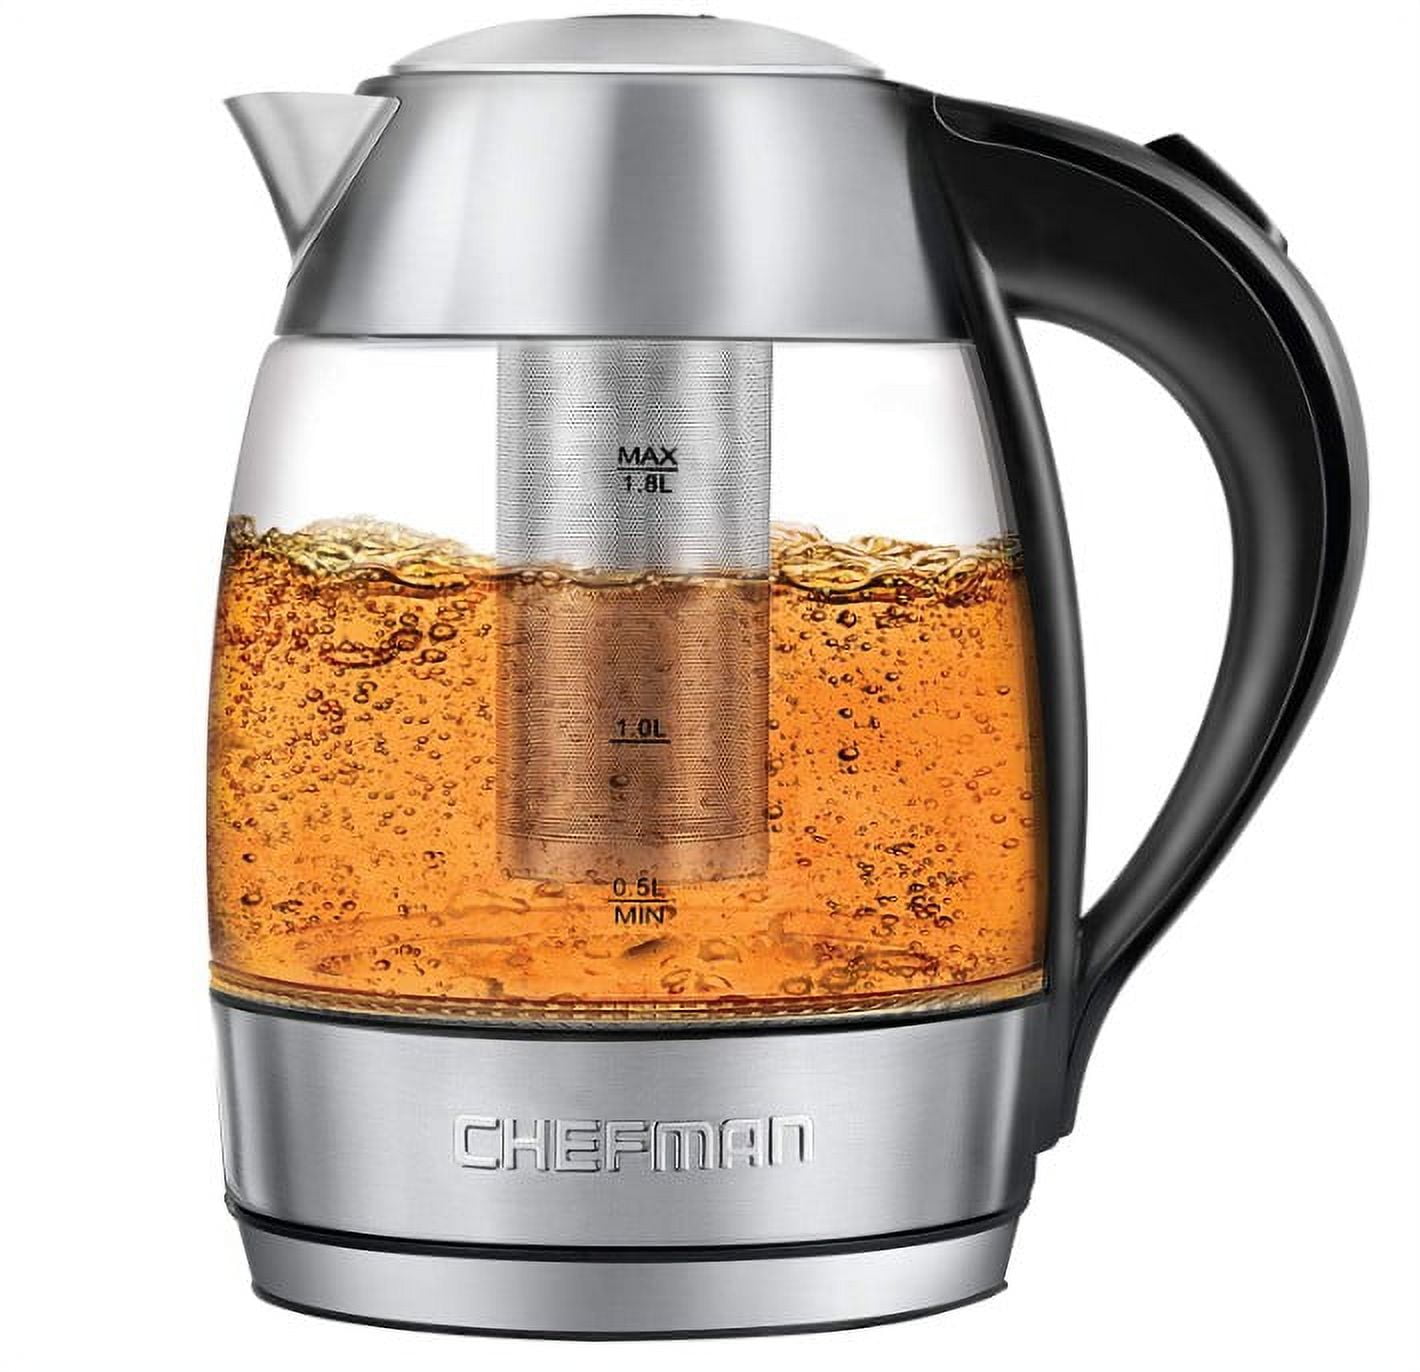 Chefman Electric Glass Kettle with Tea Infuser - Stainless Steel, 1.8 L -  Smith's Food and Drug